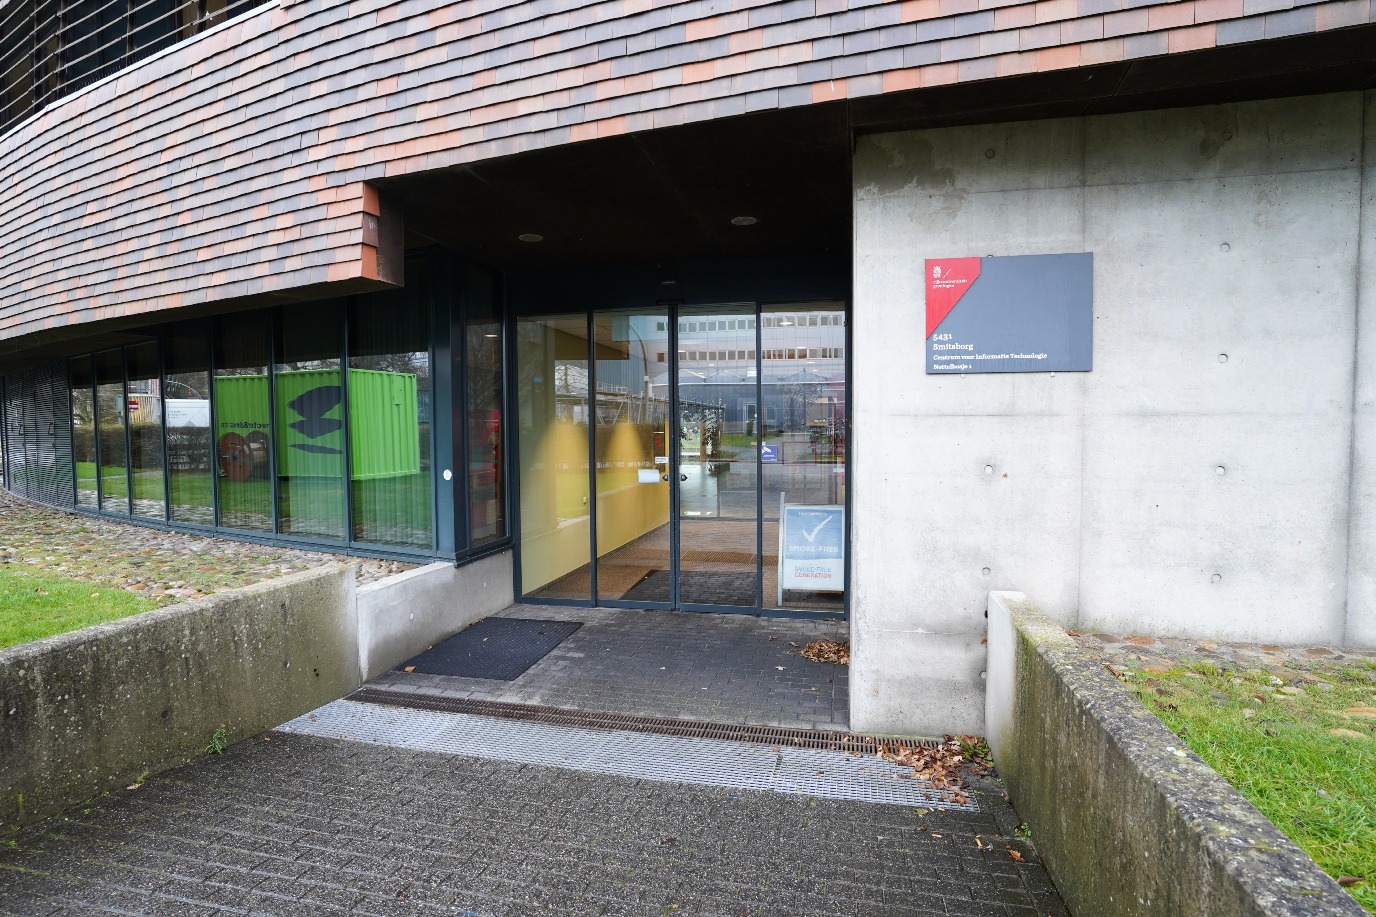 Main entrance of the building, automatic sliding doors